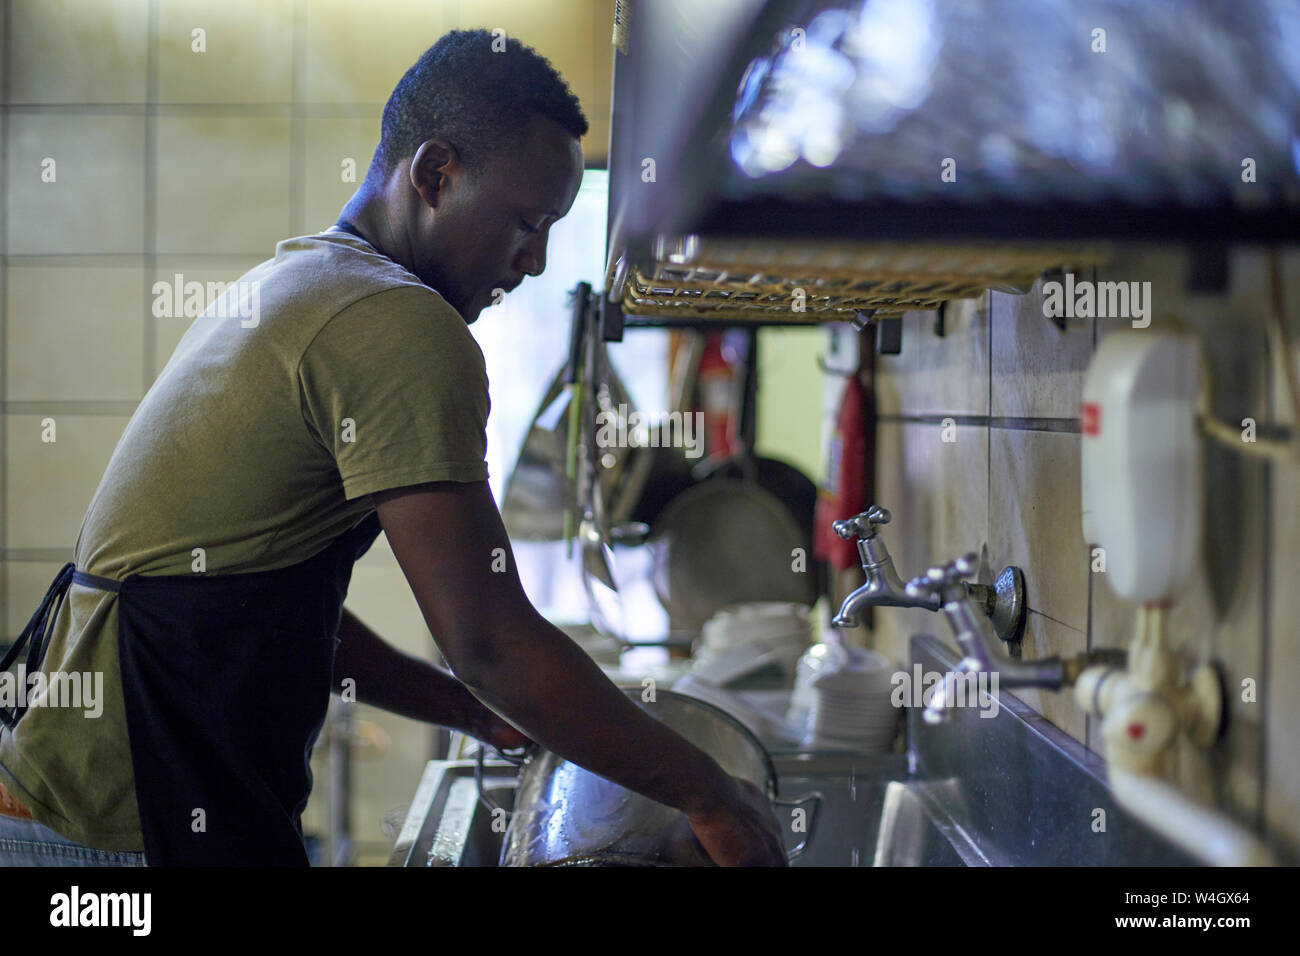 https://c8.alamy.com/comp/W4GX64/young-man-washing-dishes-in-restaurant-kitchen-south-africa-W4GX64.jpg